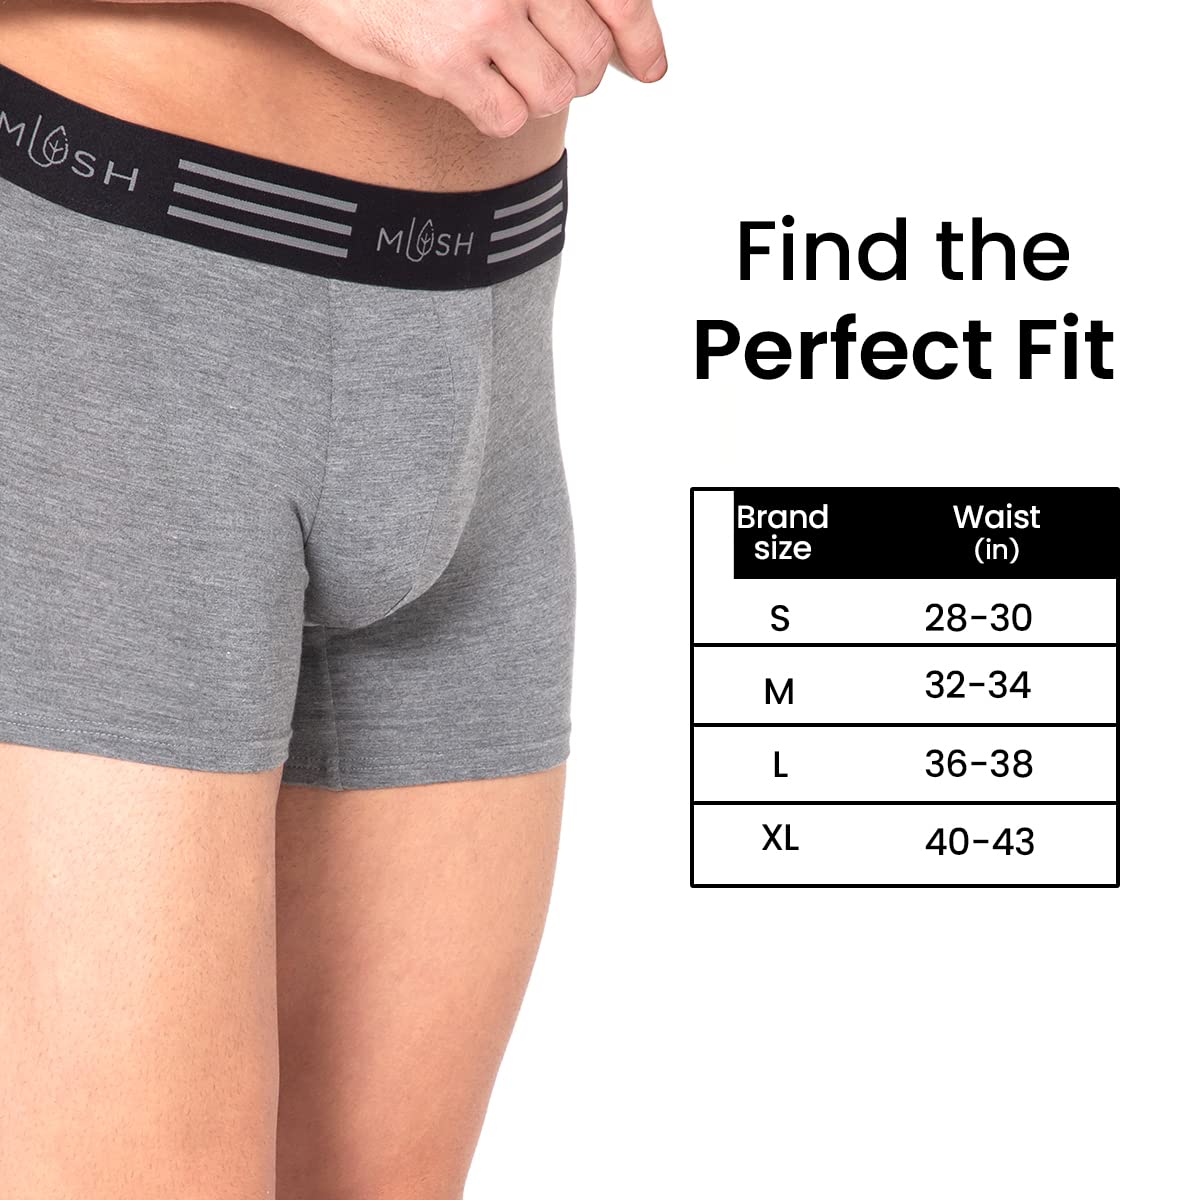 Mush Ultra Soft, Breathable, Feather Light Men's Bamboo Trunk || Naturally Anti-Odor and Anti-Microbial Bamboo Innerwear Pack of 3 (M, Grey White and Black)